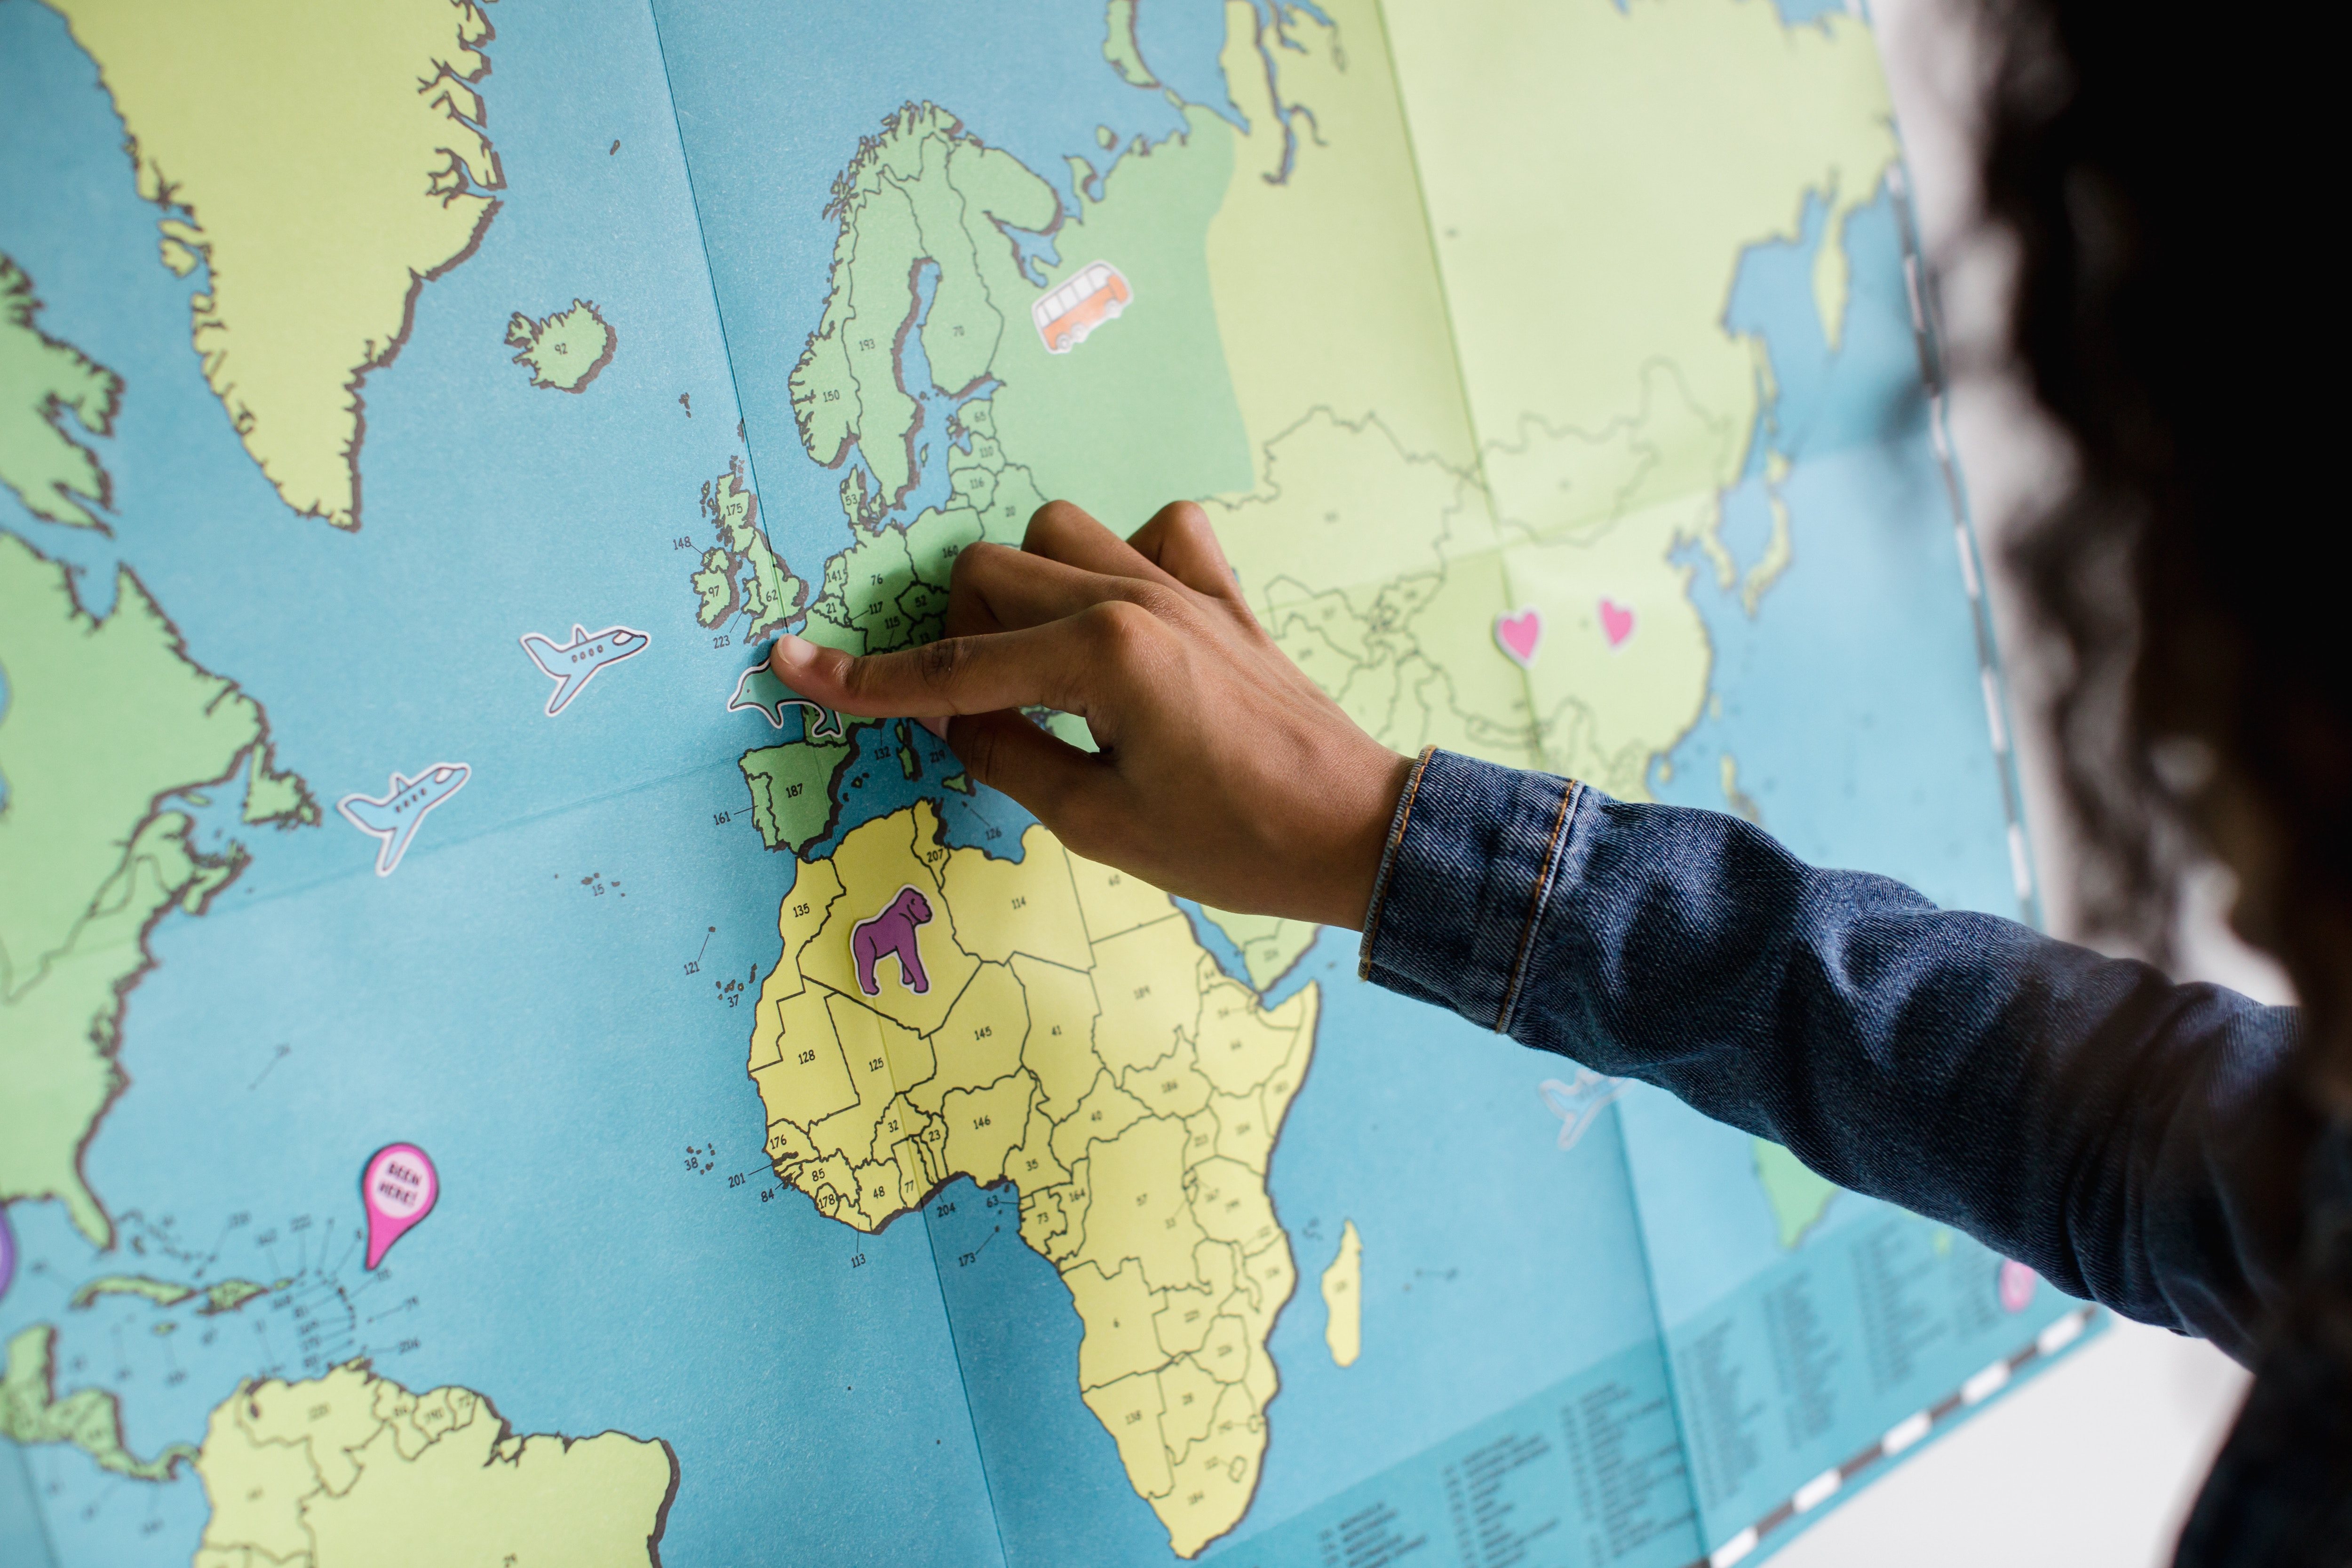 person putting a pin on a world map